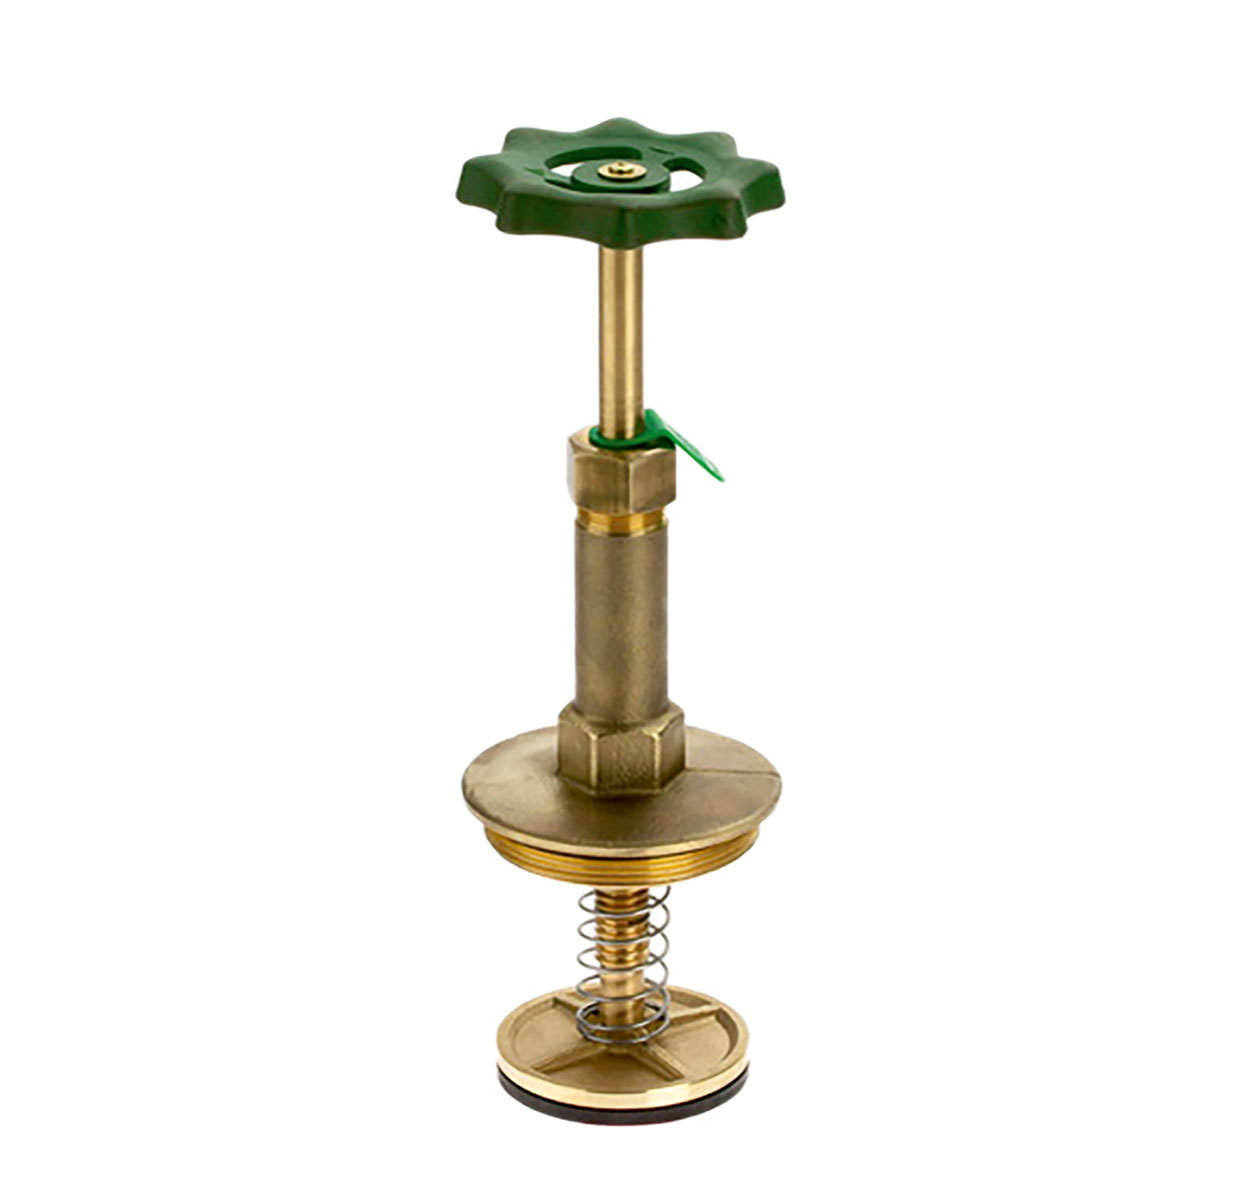 1219650 - Brass Upper-part with grease chamber for Combined Free-flow and Backflow-preventer valves, risinge Spindel